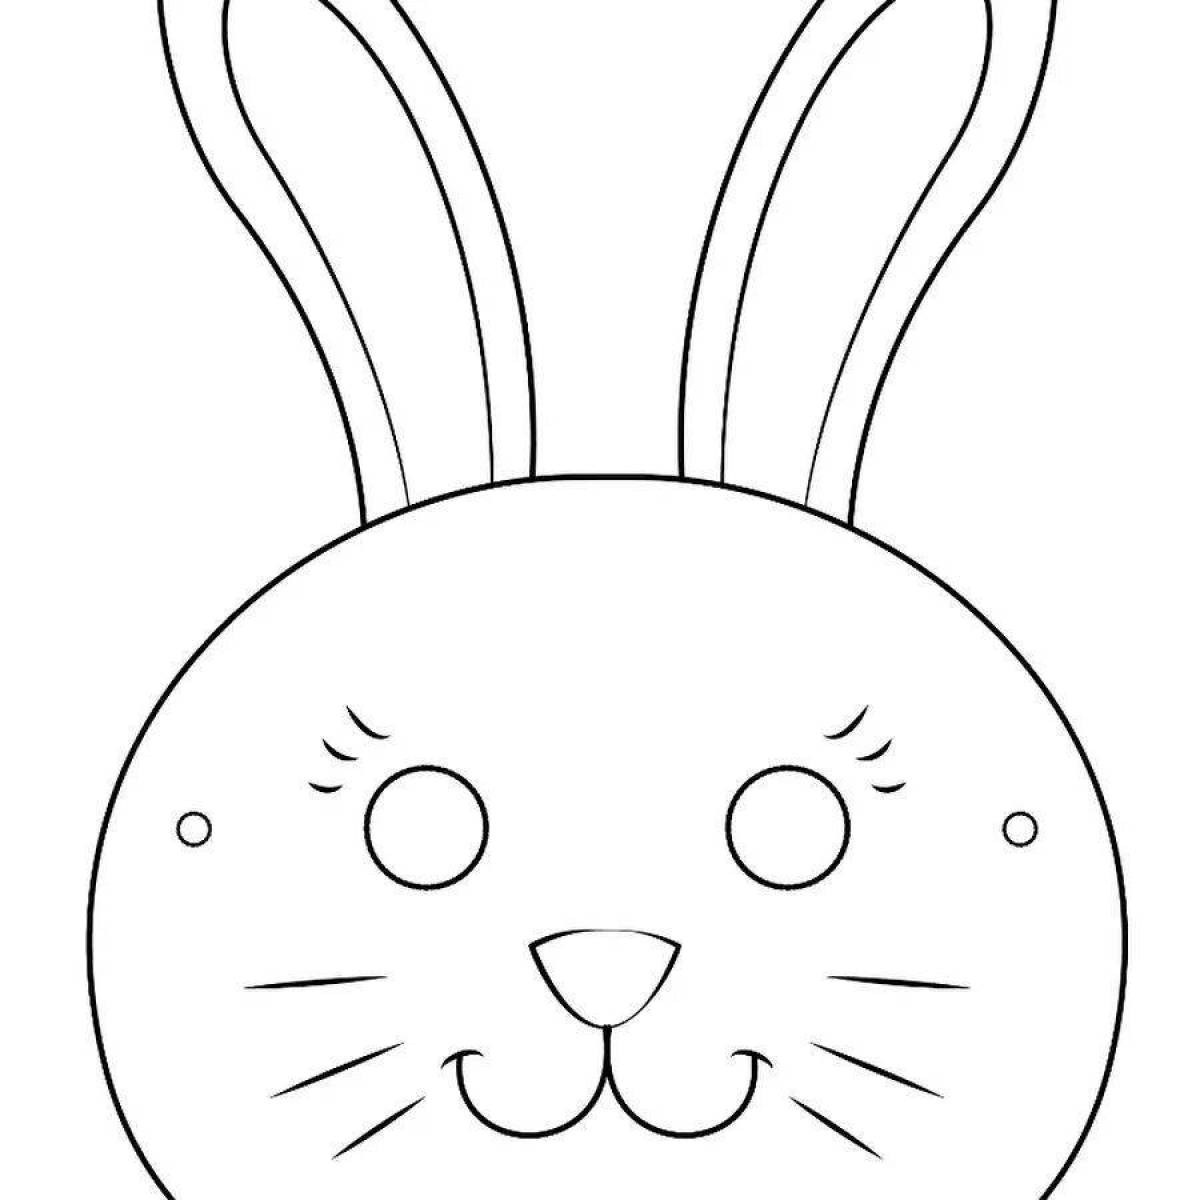 Adorable hare head coloring page